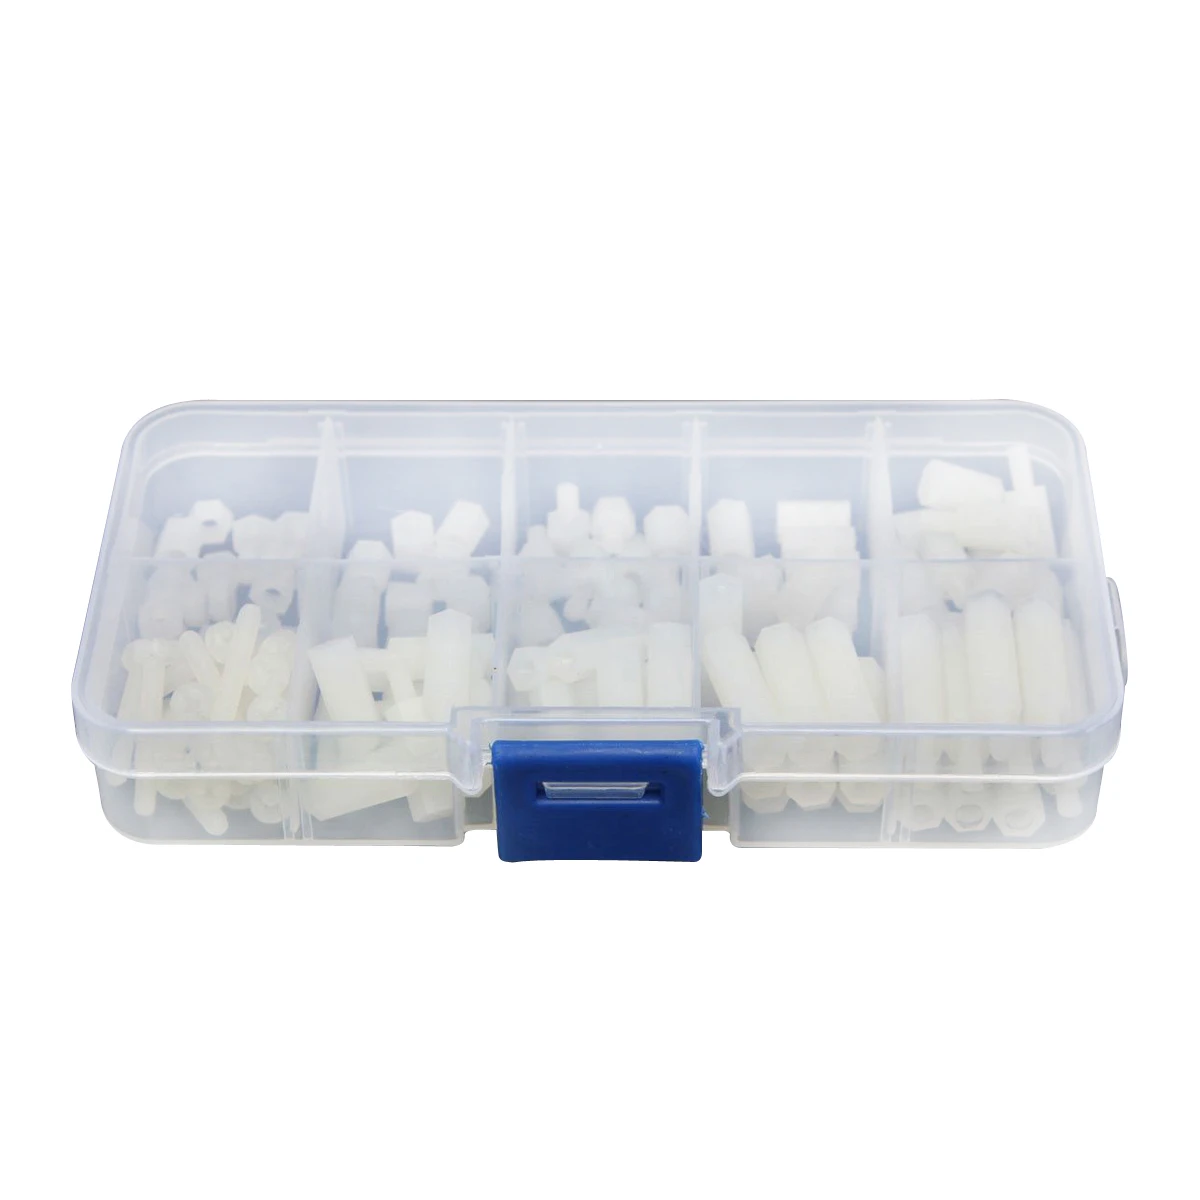 Box of 120Pcs M3 Nylon Hex Spacers Screw Nut Stand-Off Plastic Accessories Kit White 